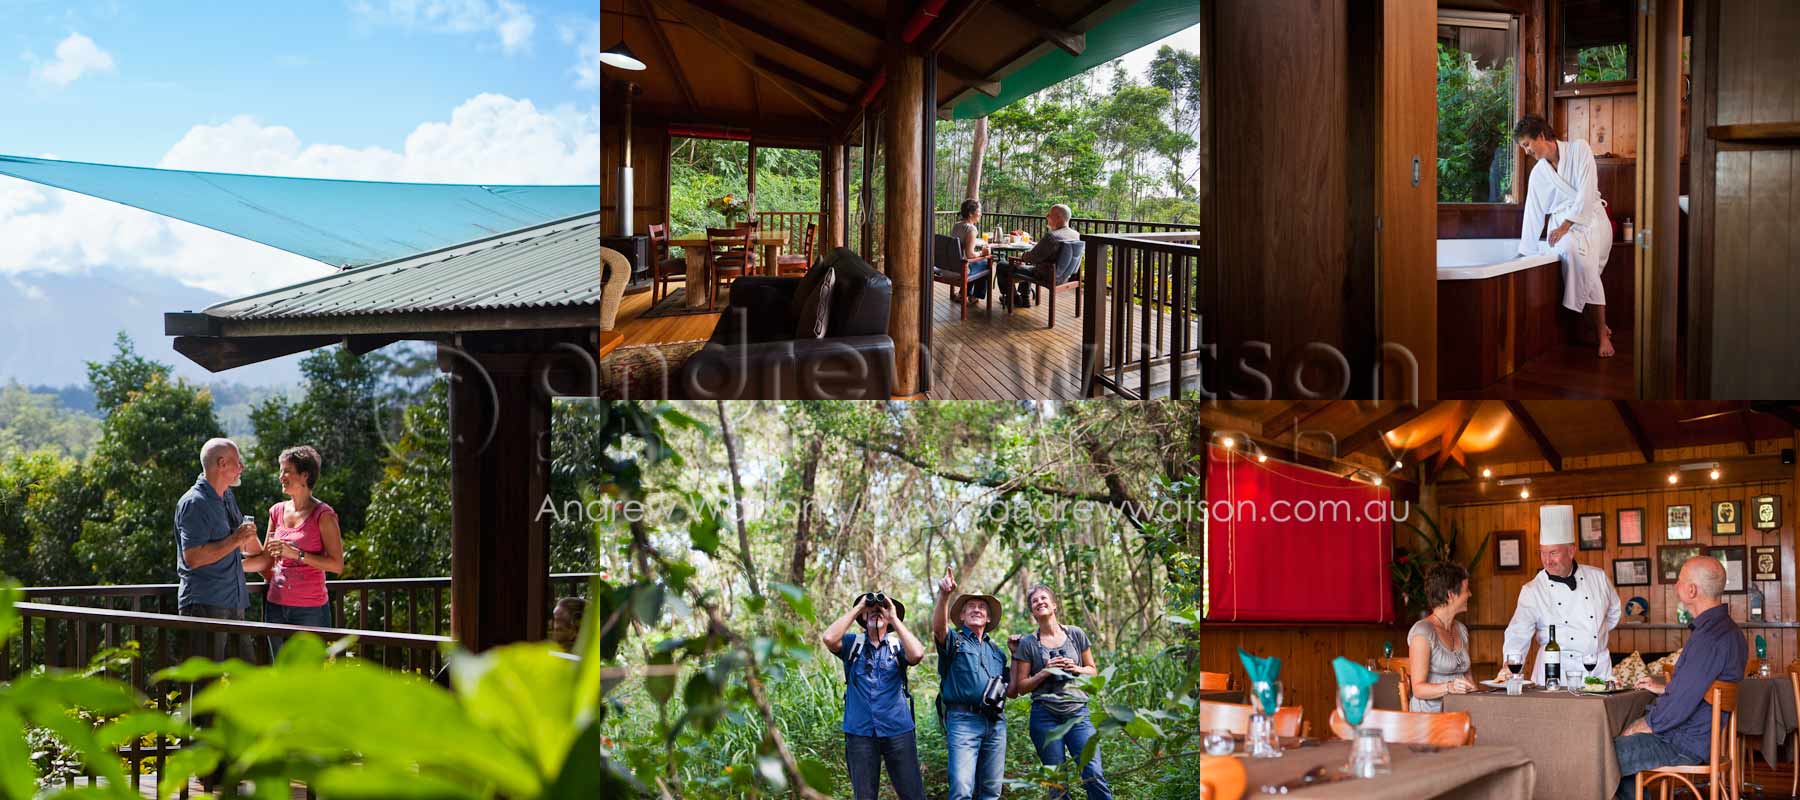 Tourism Photography - Images of couple relaxing at a Wilderness Retreat on the Atherton Tablelands